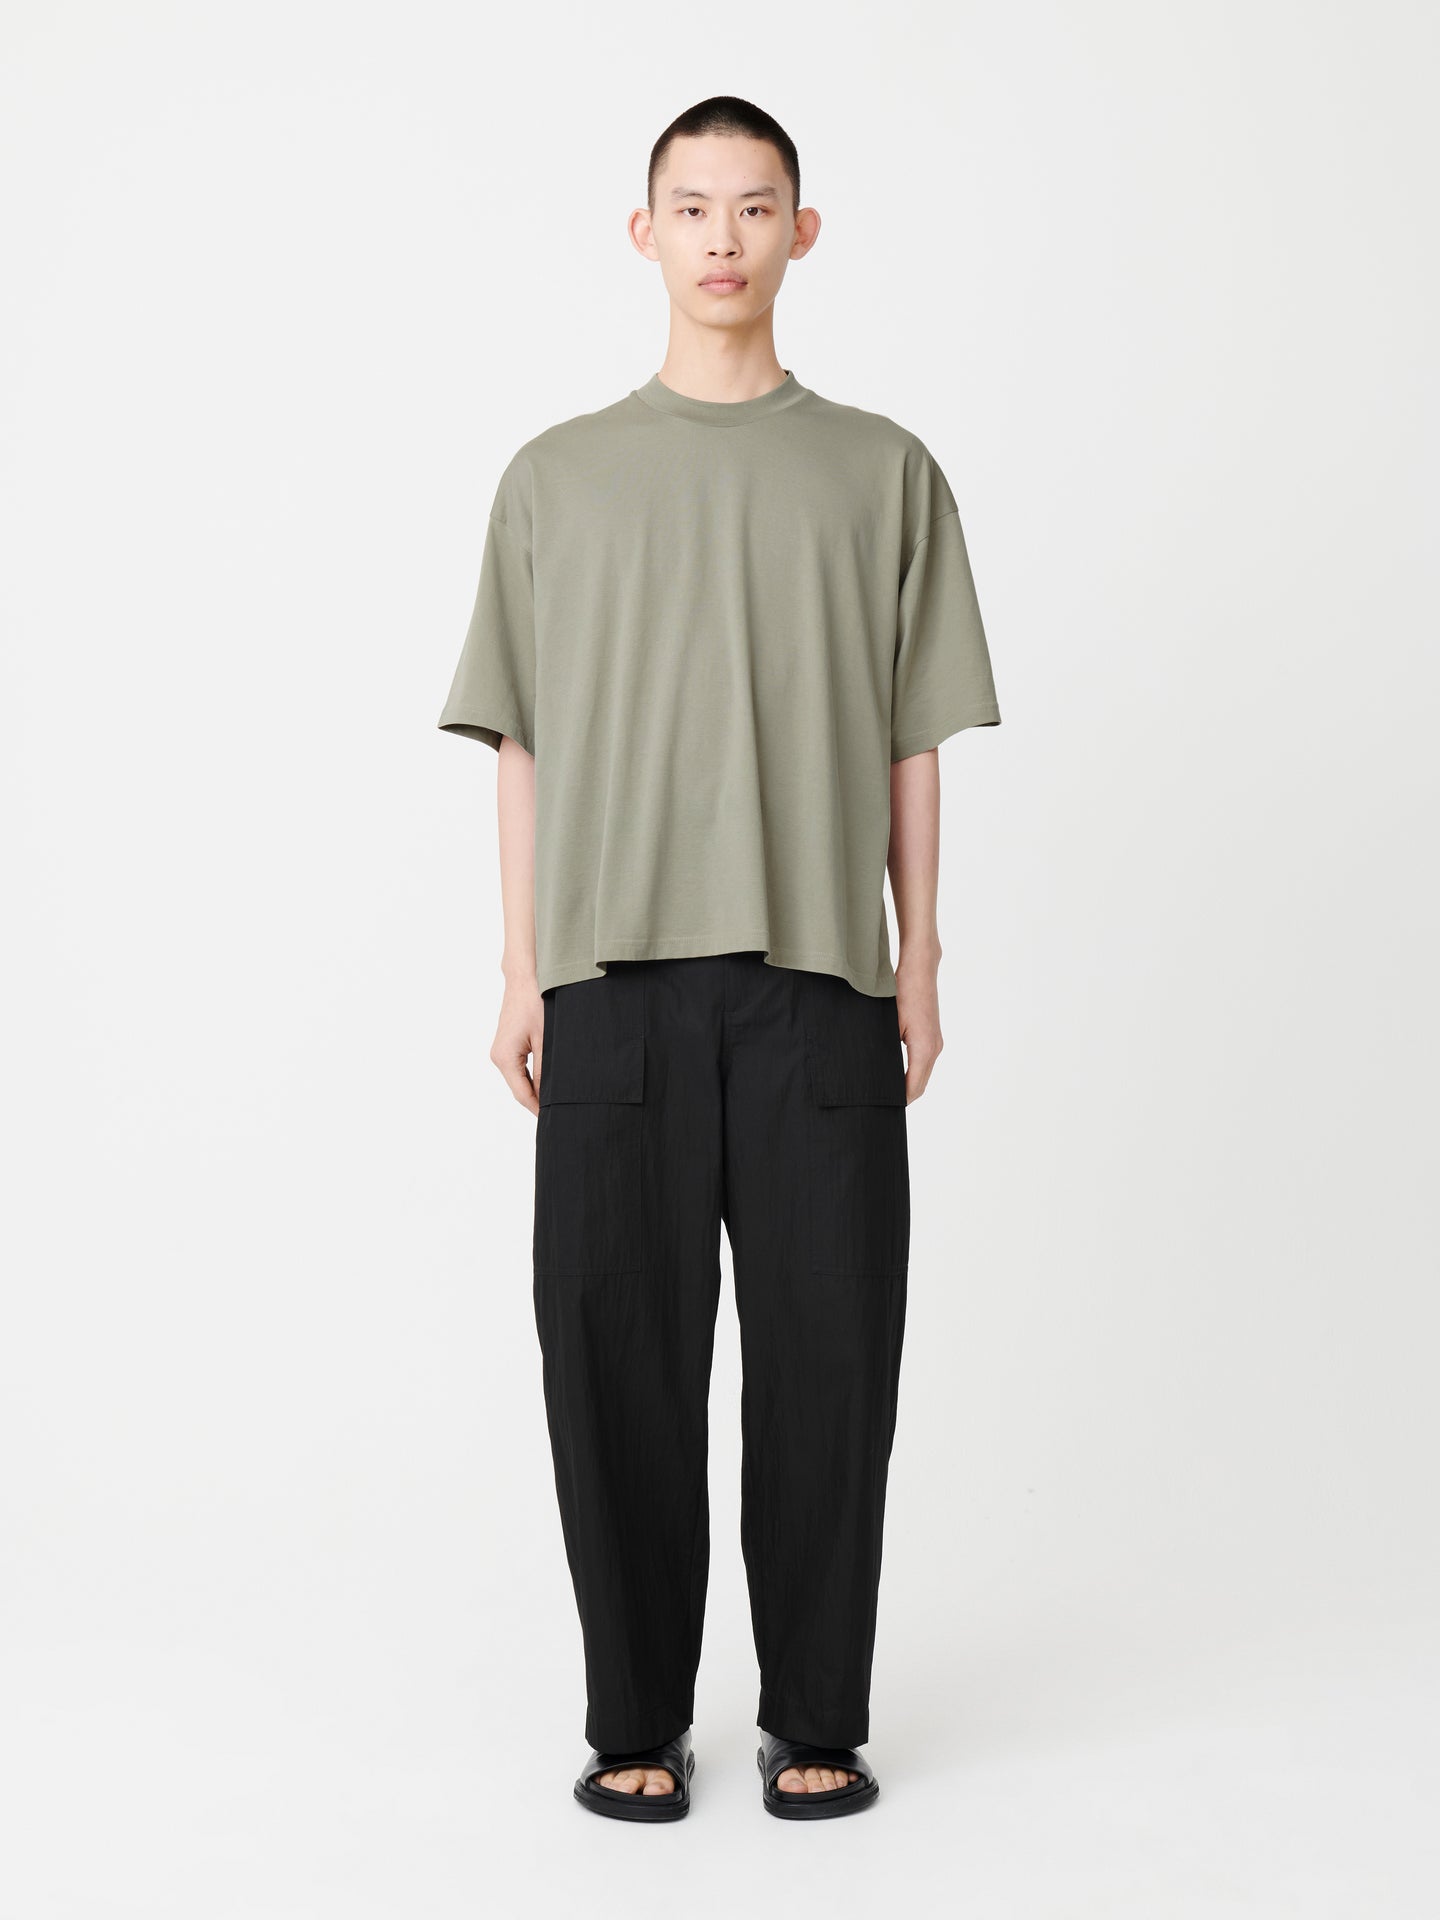 Howse Pant in Black